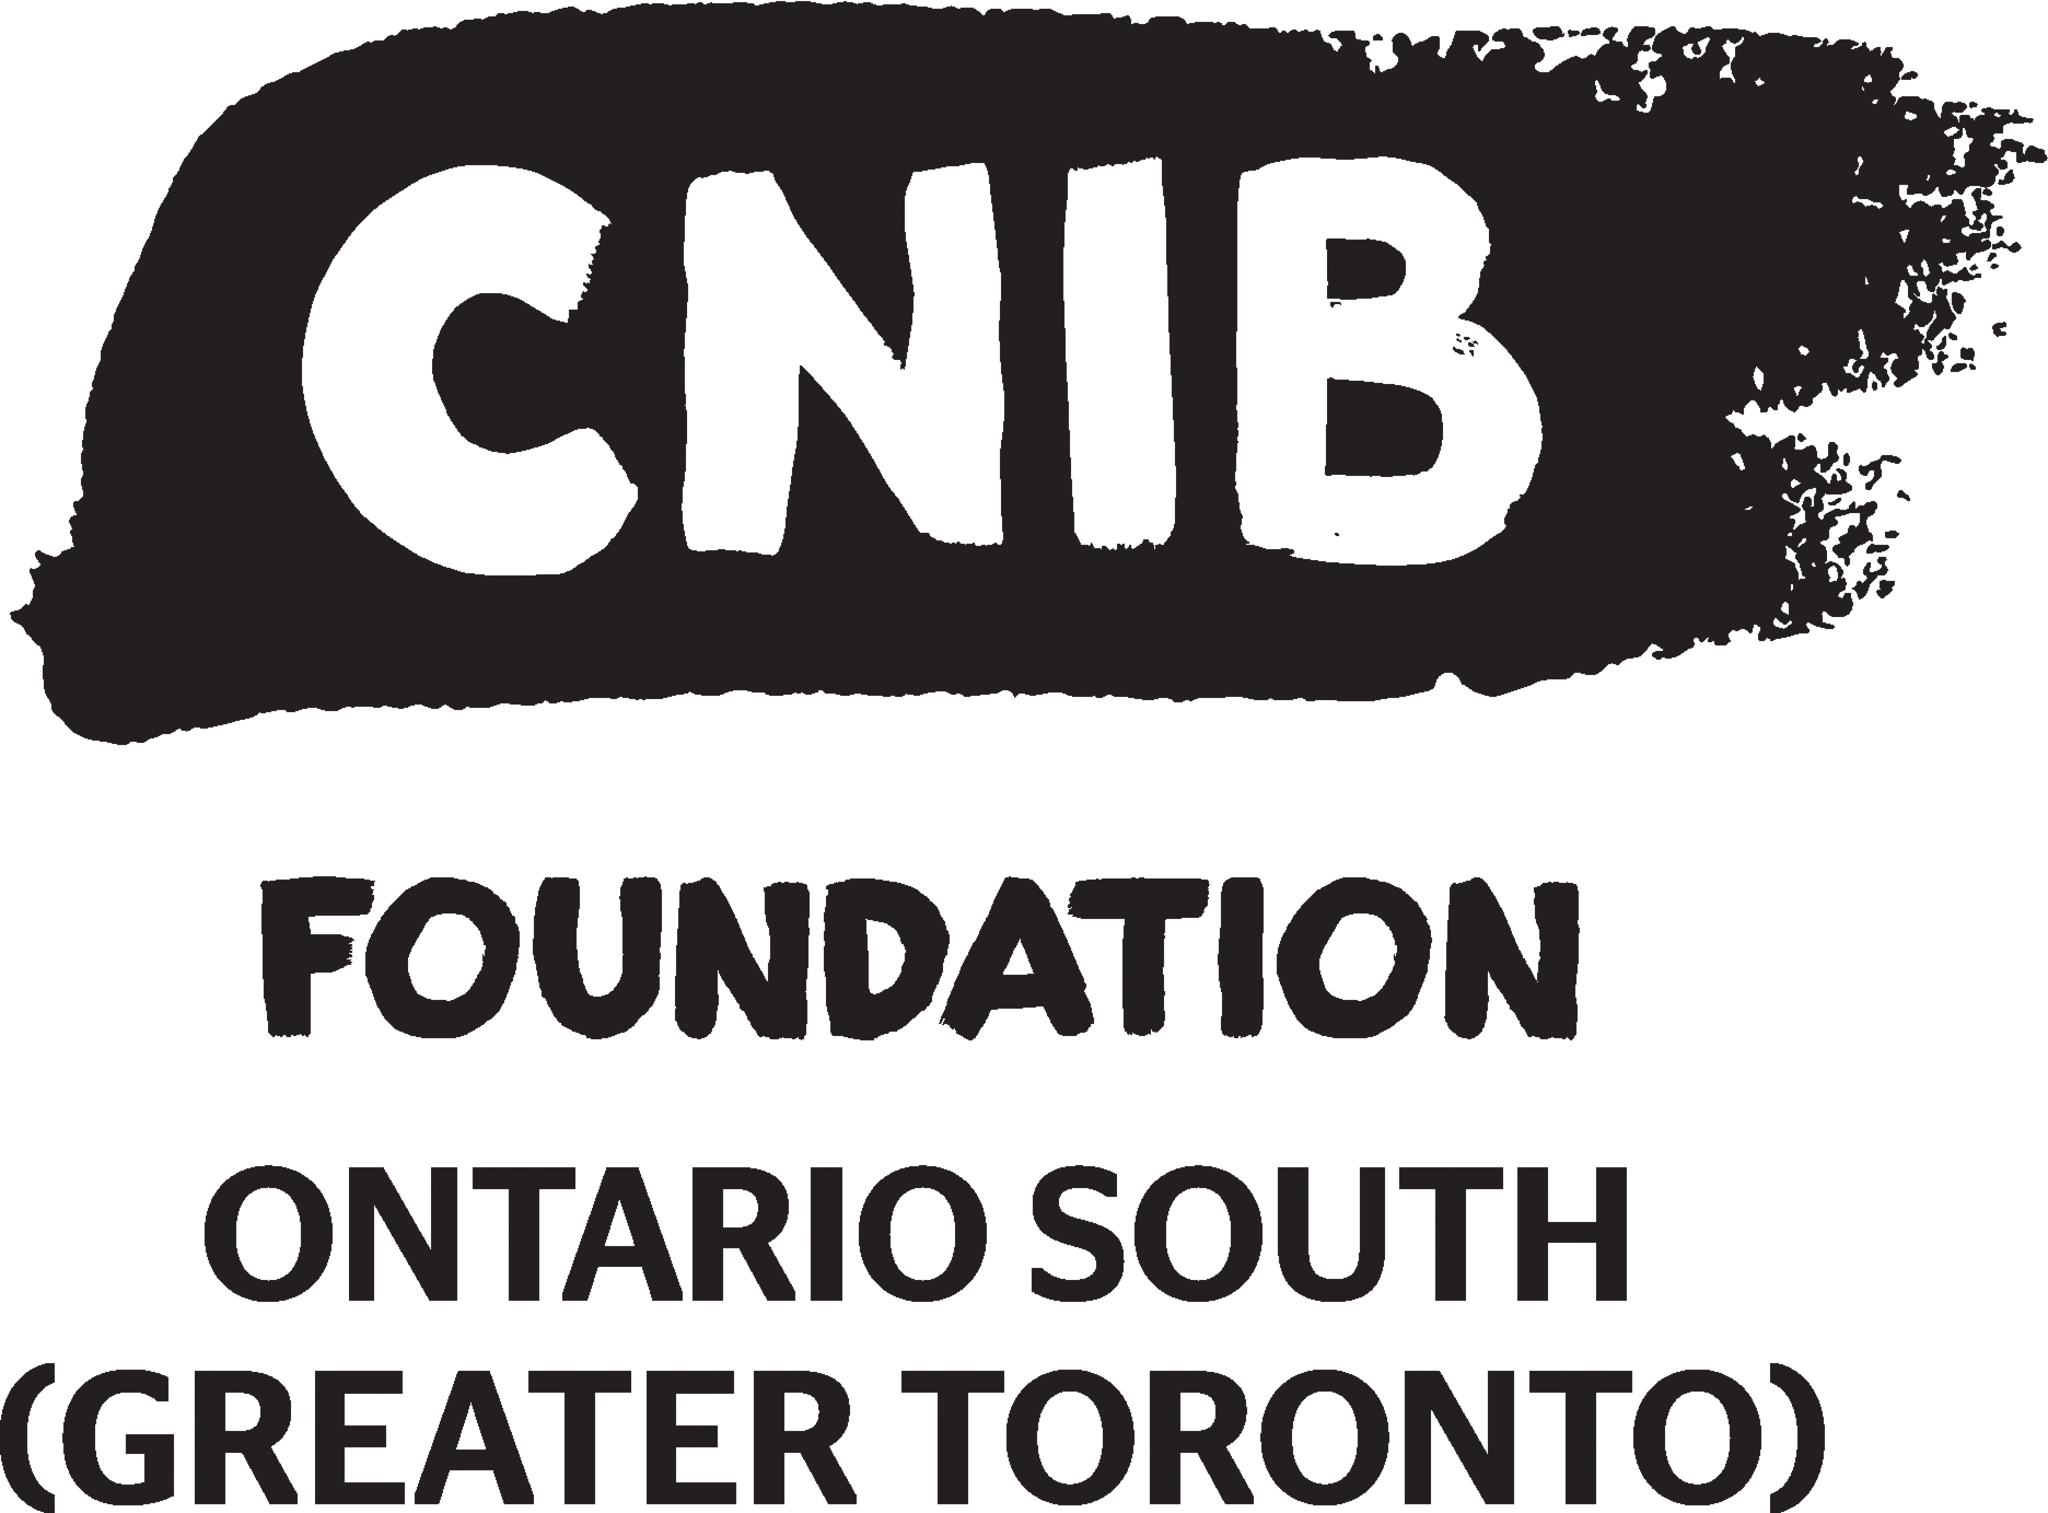 CNIB Phone Drive - donate your old smartphone!